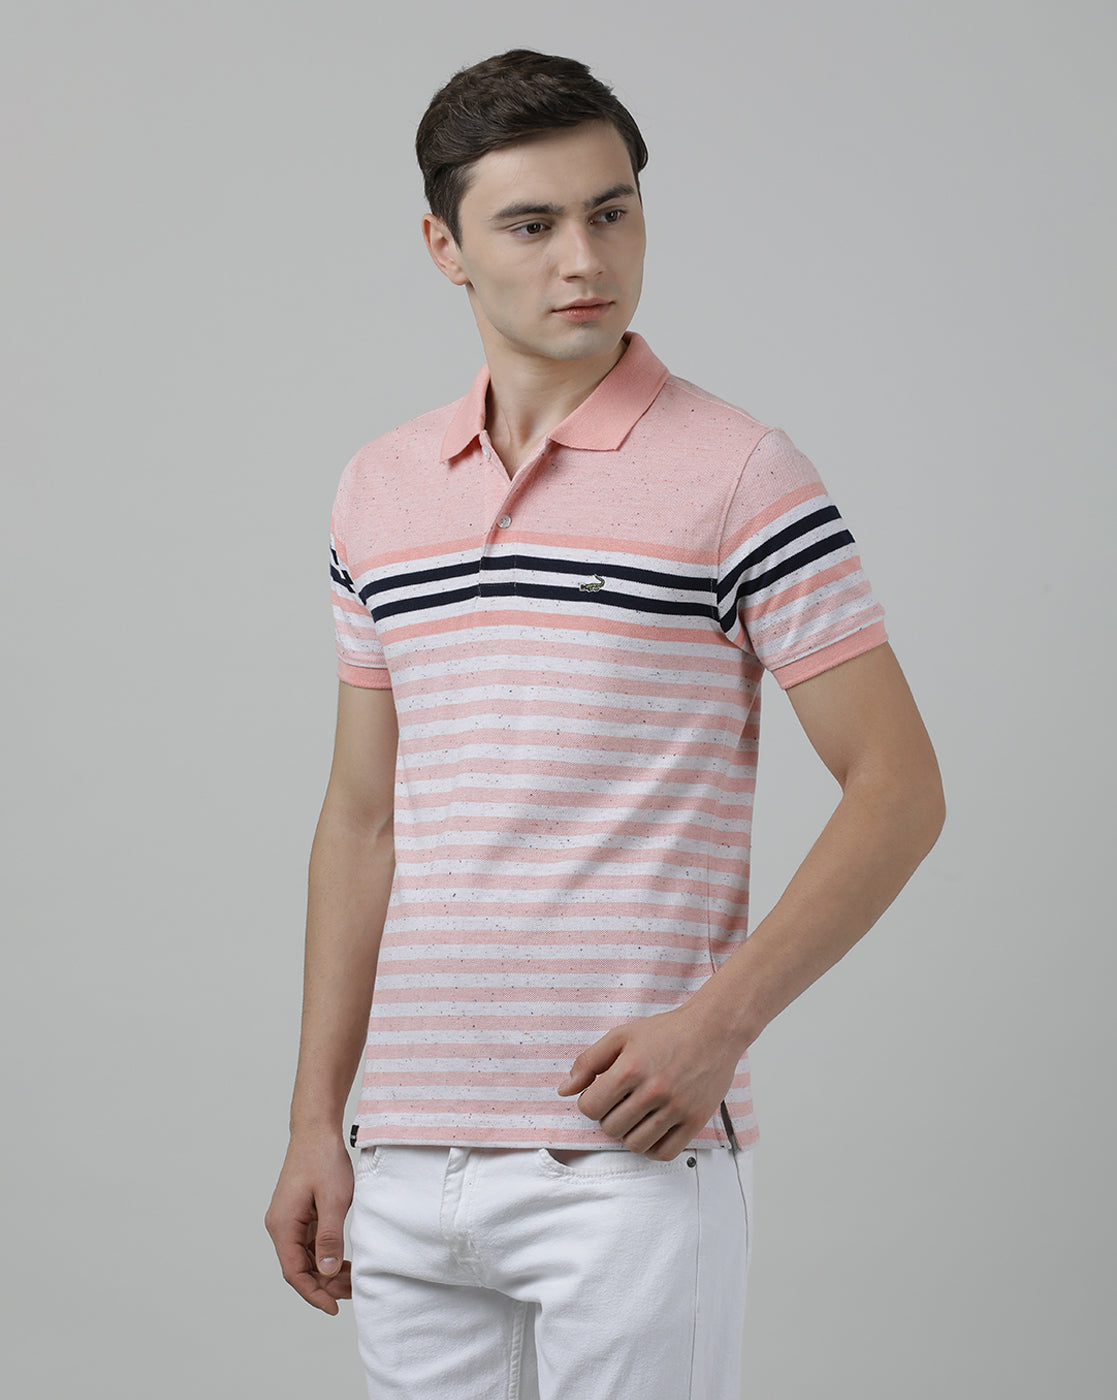 Casual Orange T-Shirt Engineering Stripes Half Sleeve Slim Fit with Collar for Men